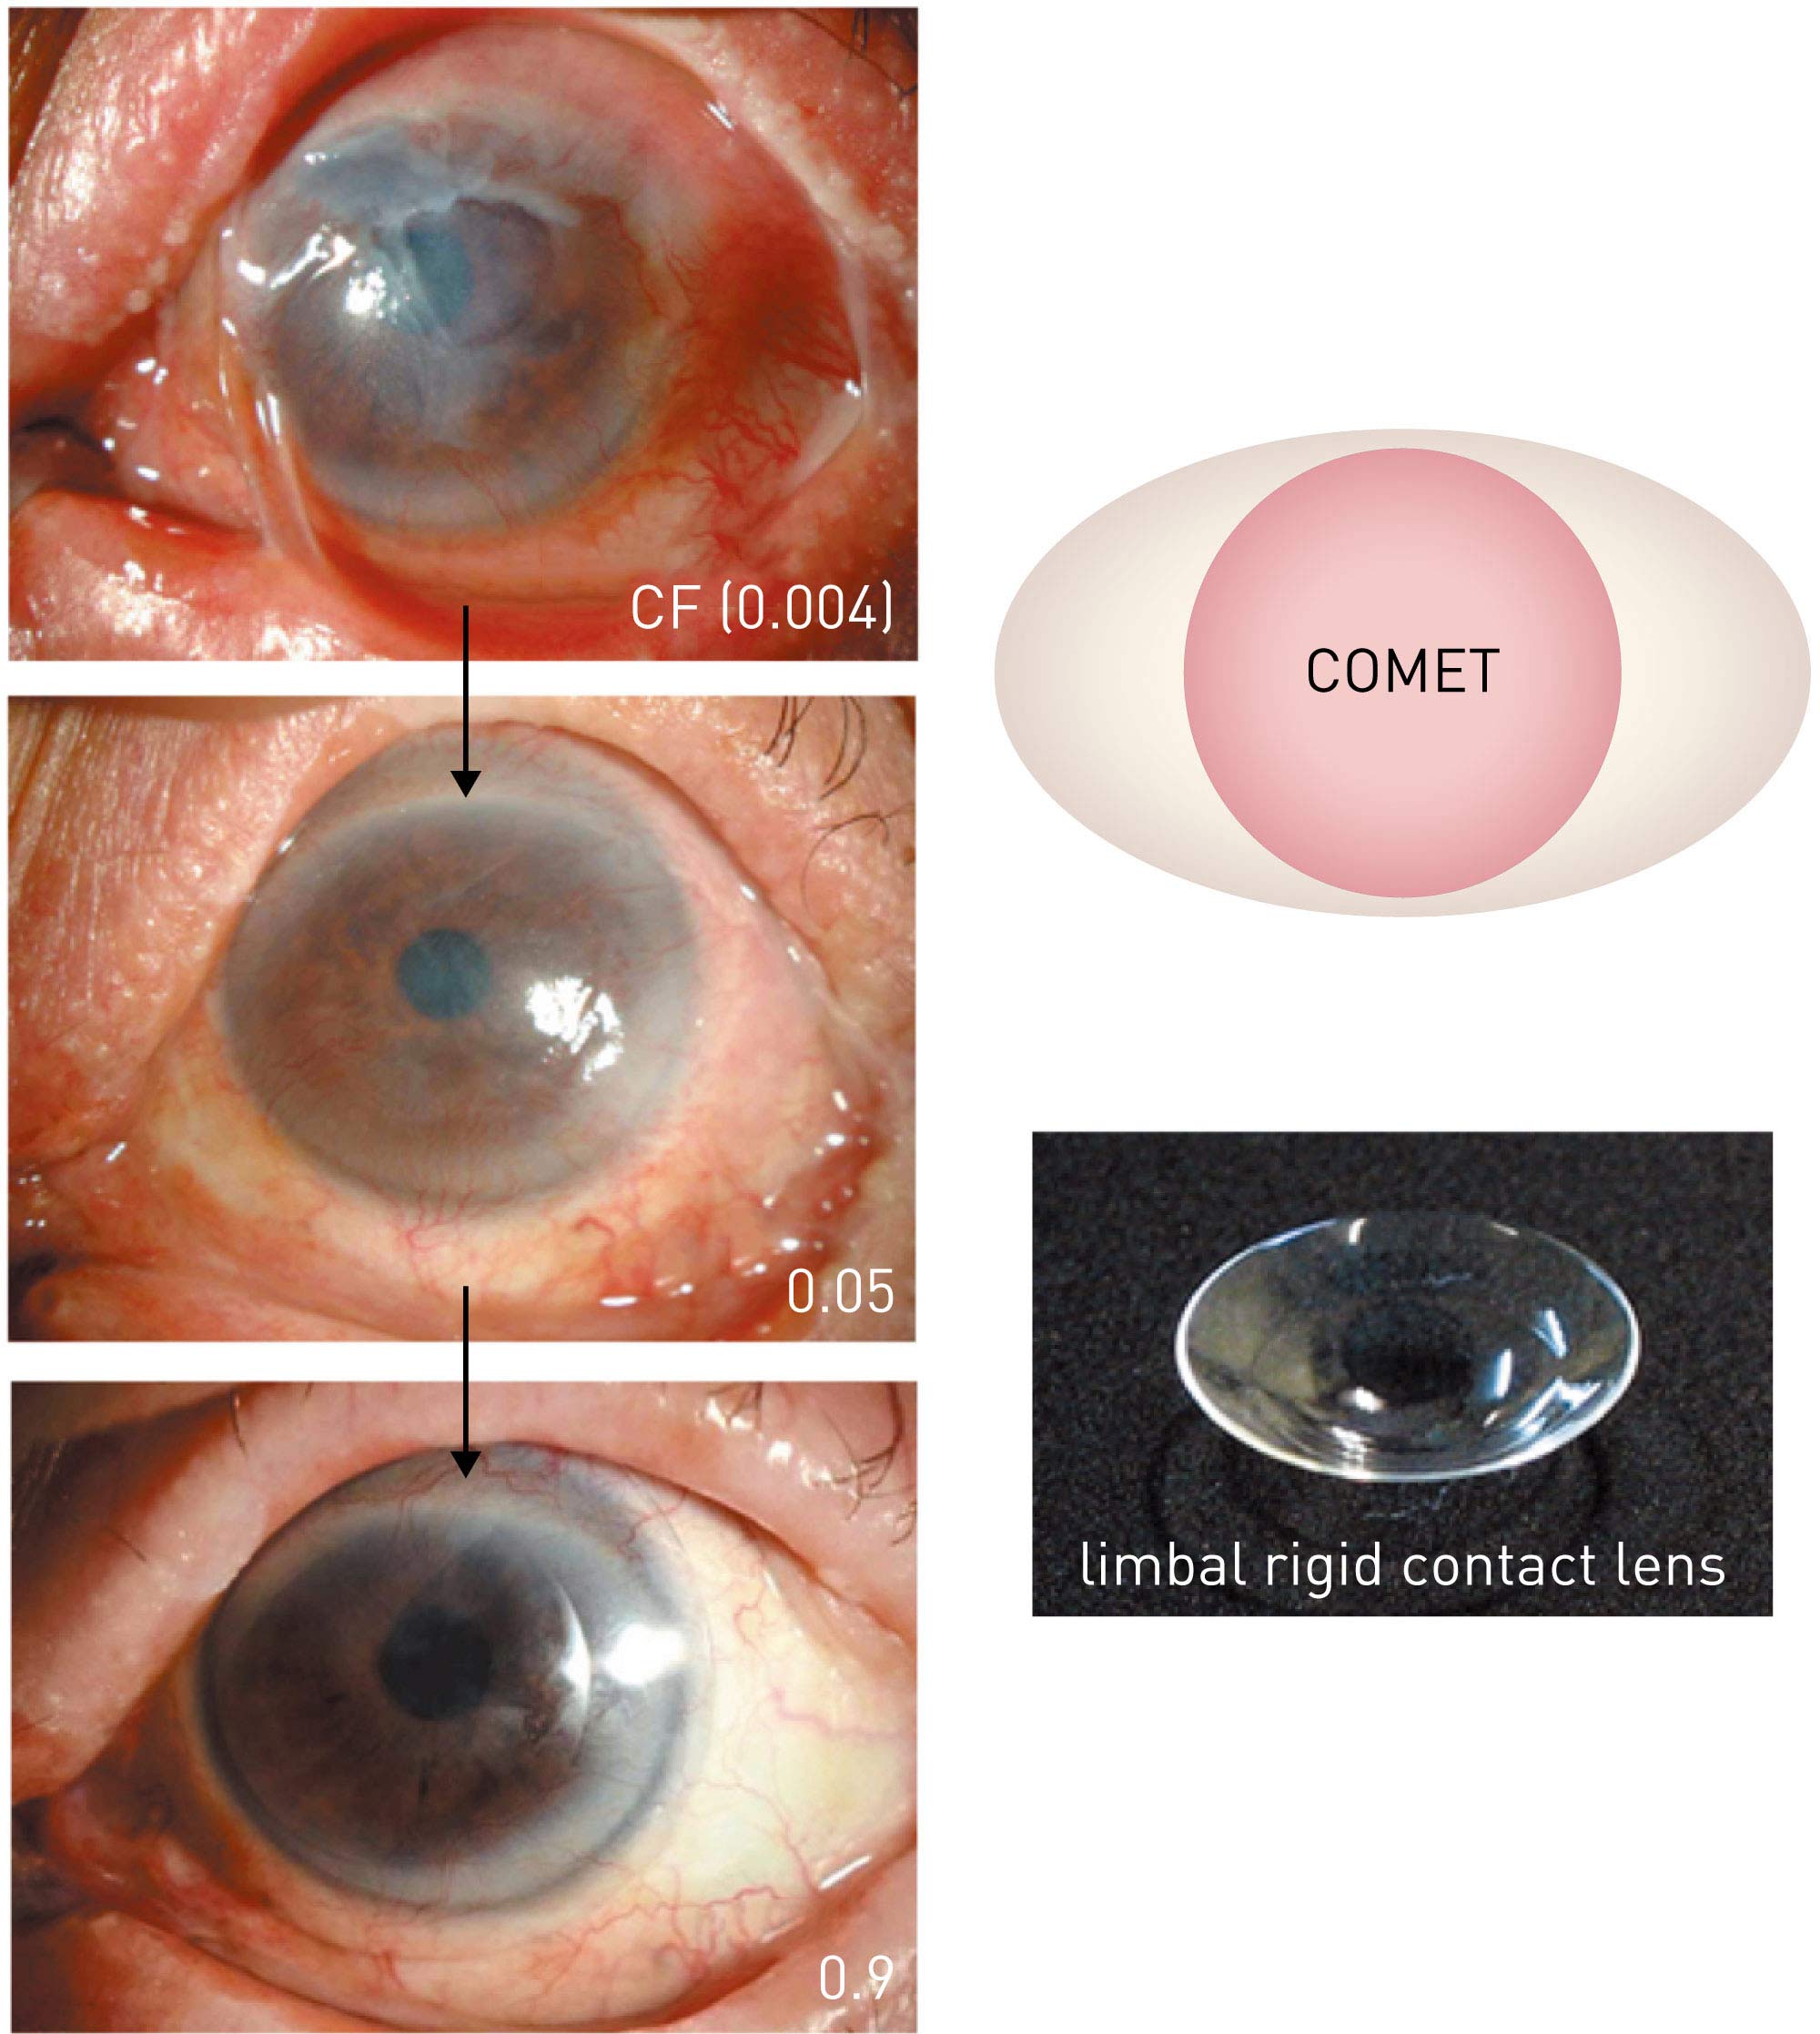 Figure 6. Improvement in visual function using limbal rigid contact lenses. A patient with Stevens–Johnson syndrome with severe adhesion on the ocular surface and a preoperative vision of counting fingers (0.004). The patient’s own oral mucosal epithelium transplanted onto the cornea was nearly stabilized 6 months after surgery,improving visual acuity to 0.05; the use of limbal rigid contact lenses further improved visual acuity to 0.9–1.0. This improvement has been maintained for over 7 years since surgery. (Modified from Ref. 43.) COMET, cultivated oral mucosal epithelial sheet transplantation